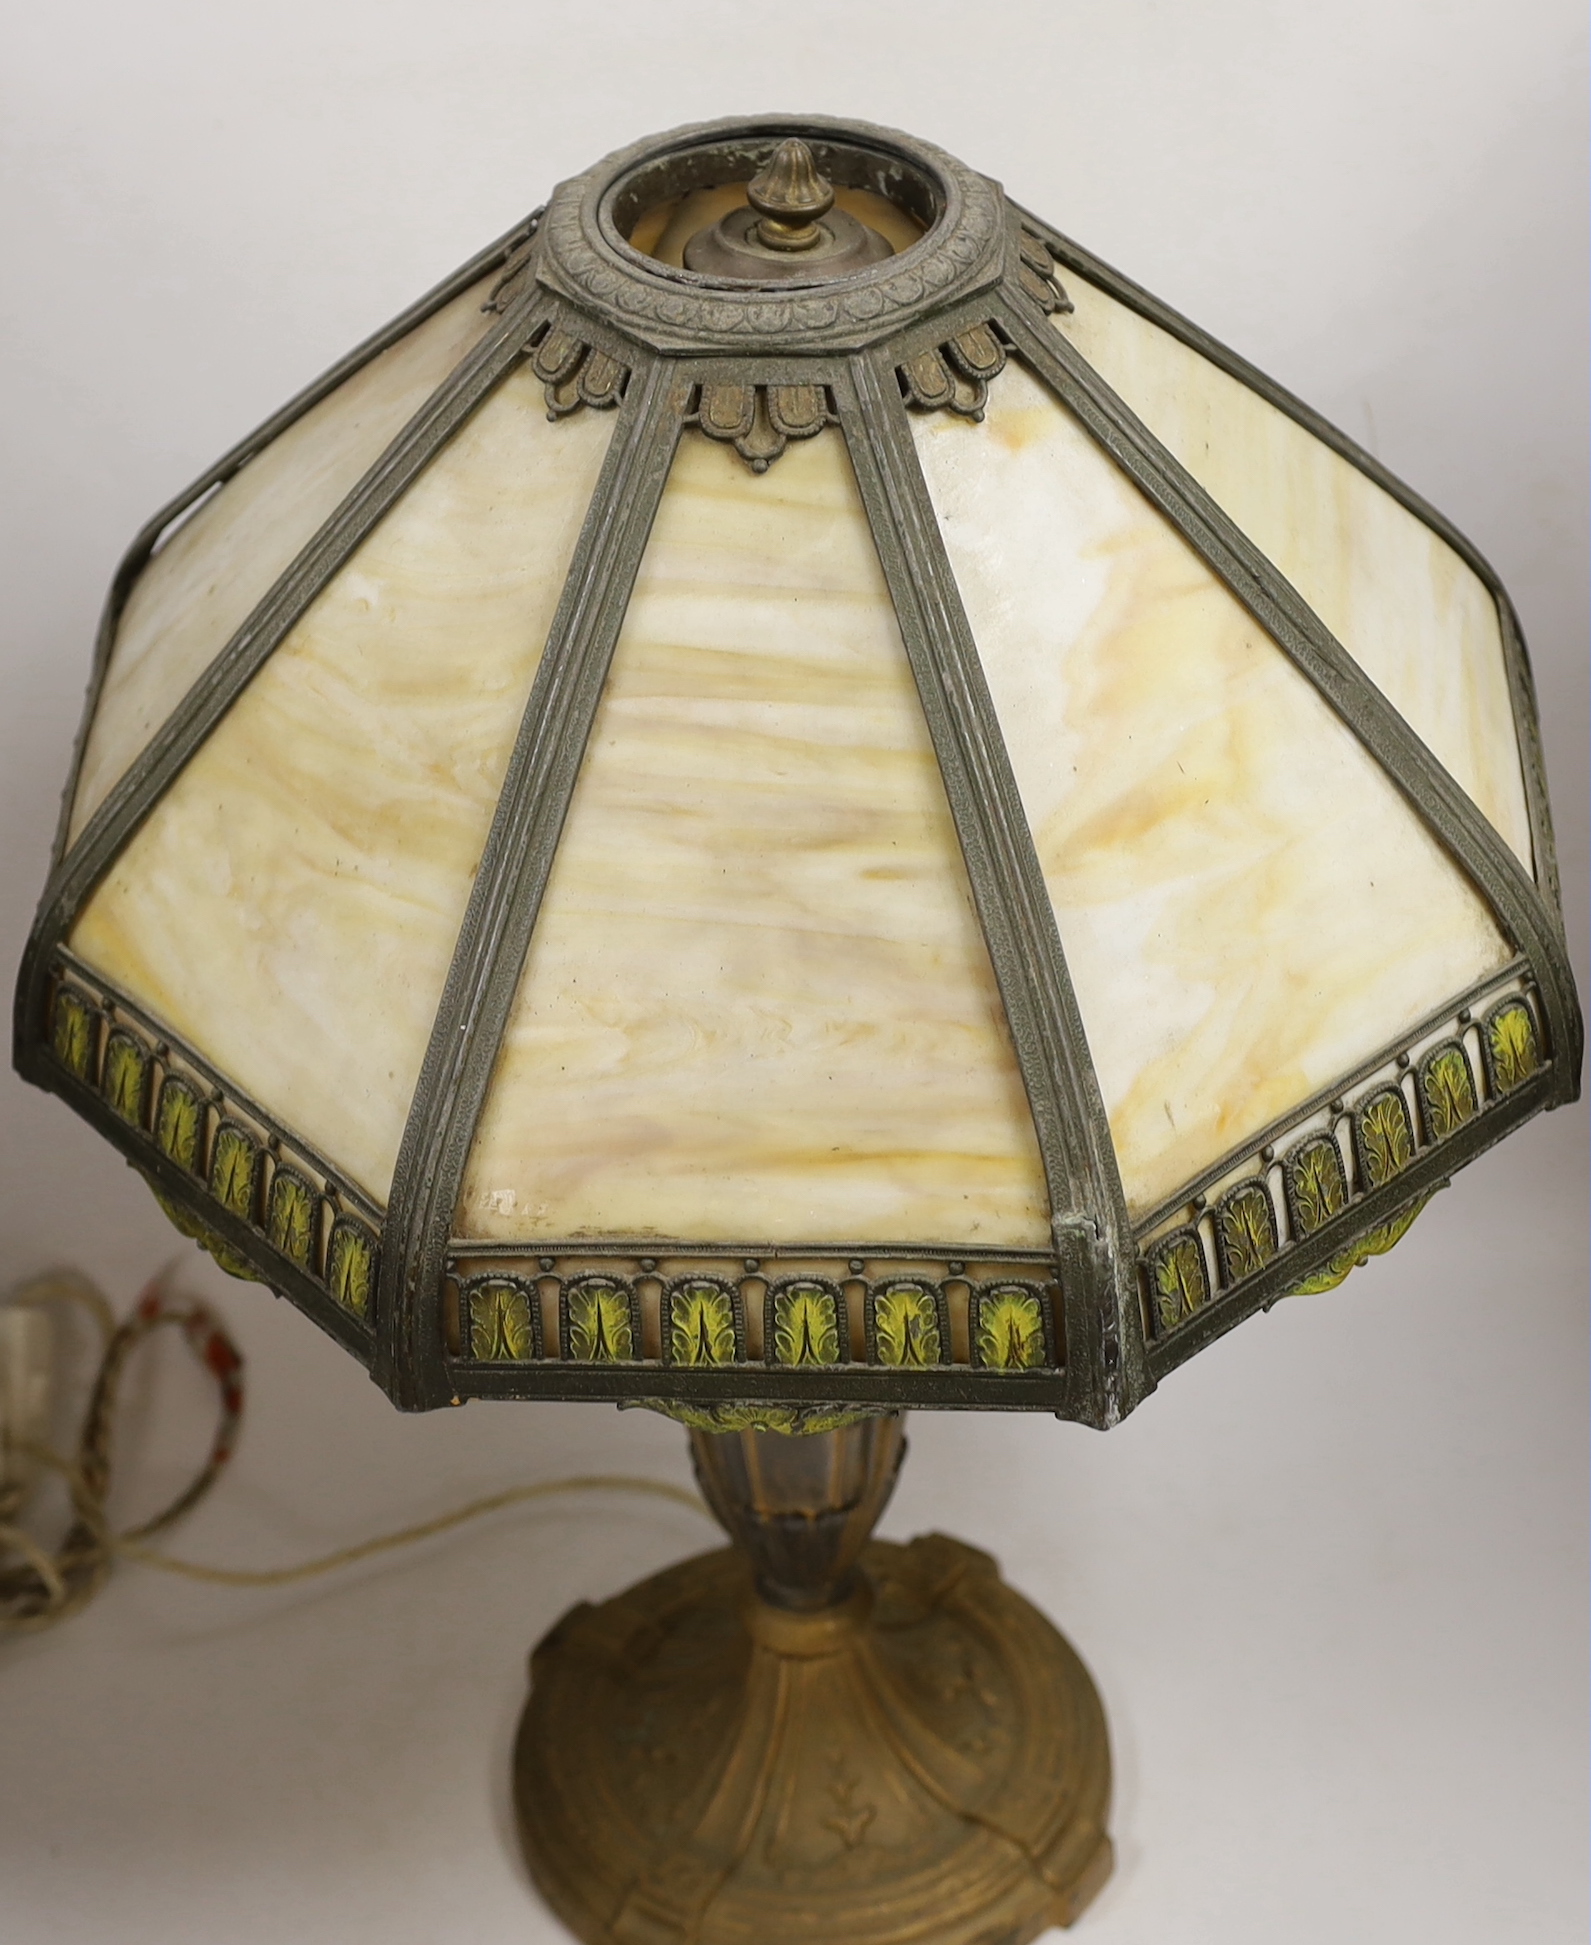 A Louis XVI style gilt spelter table lamp with octagonal Tiffany style glass shade, 58cm high